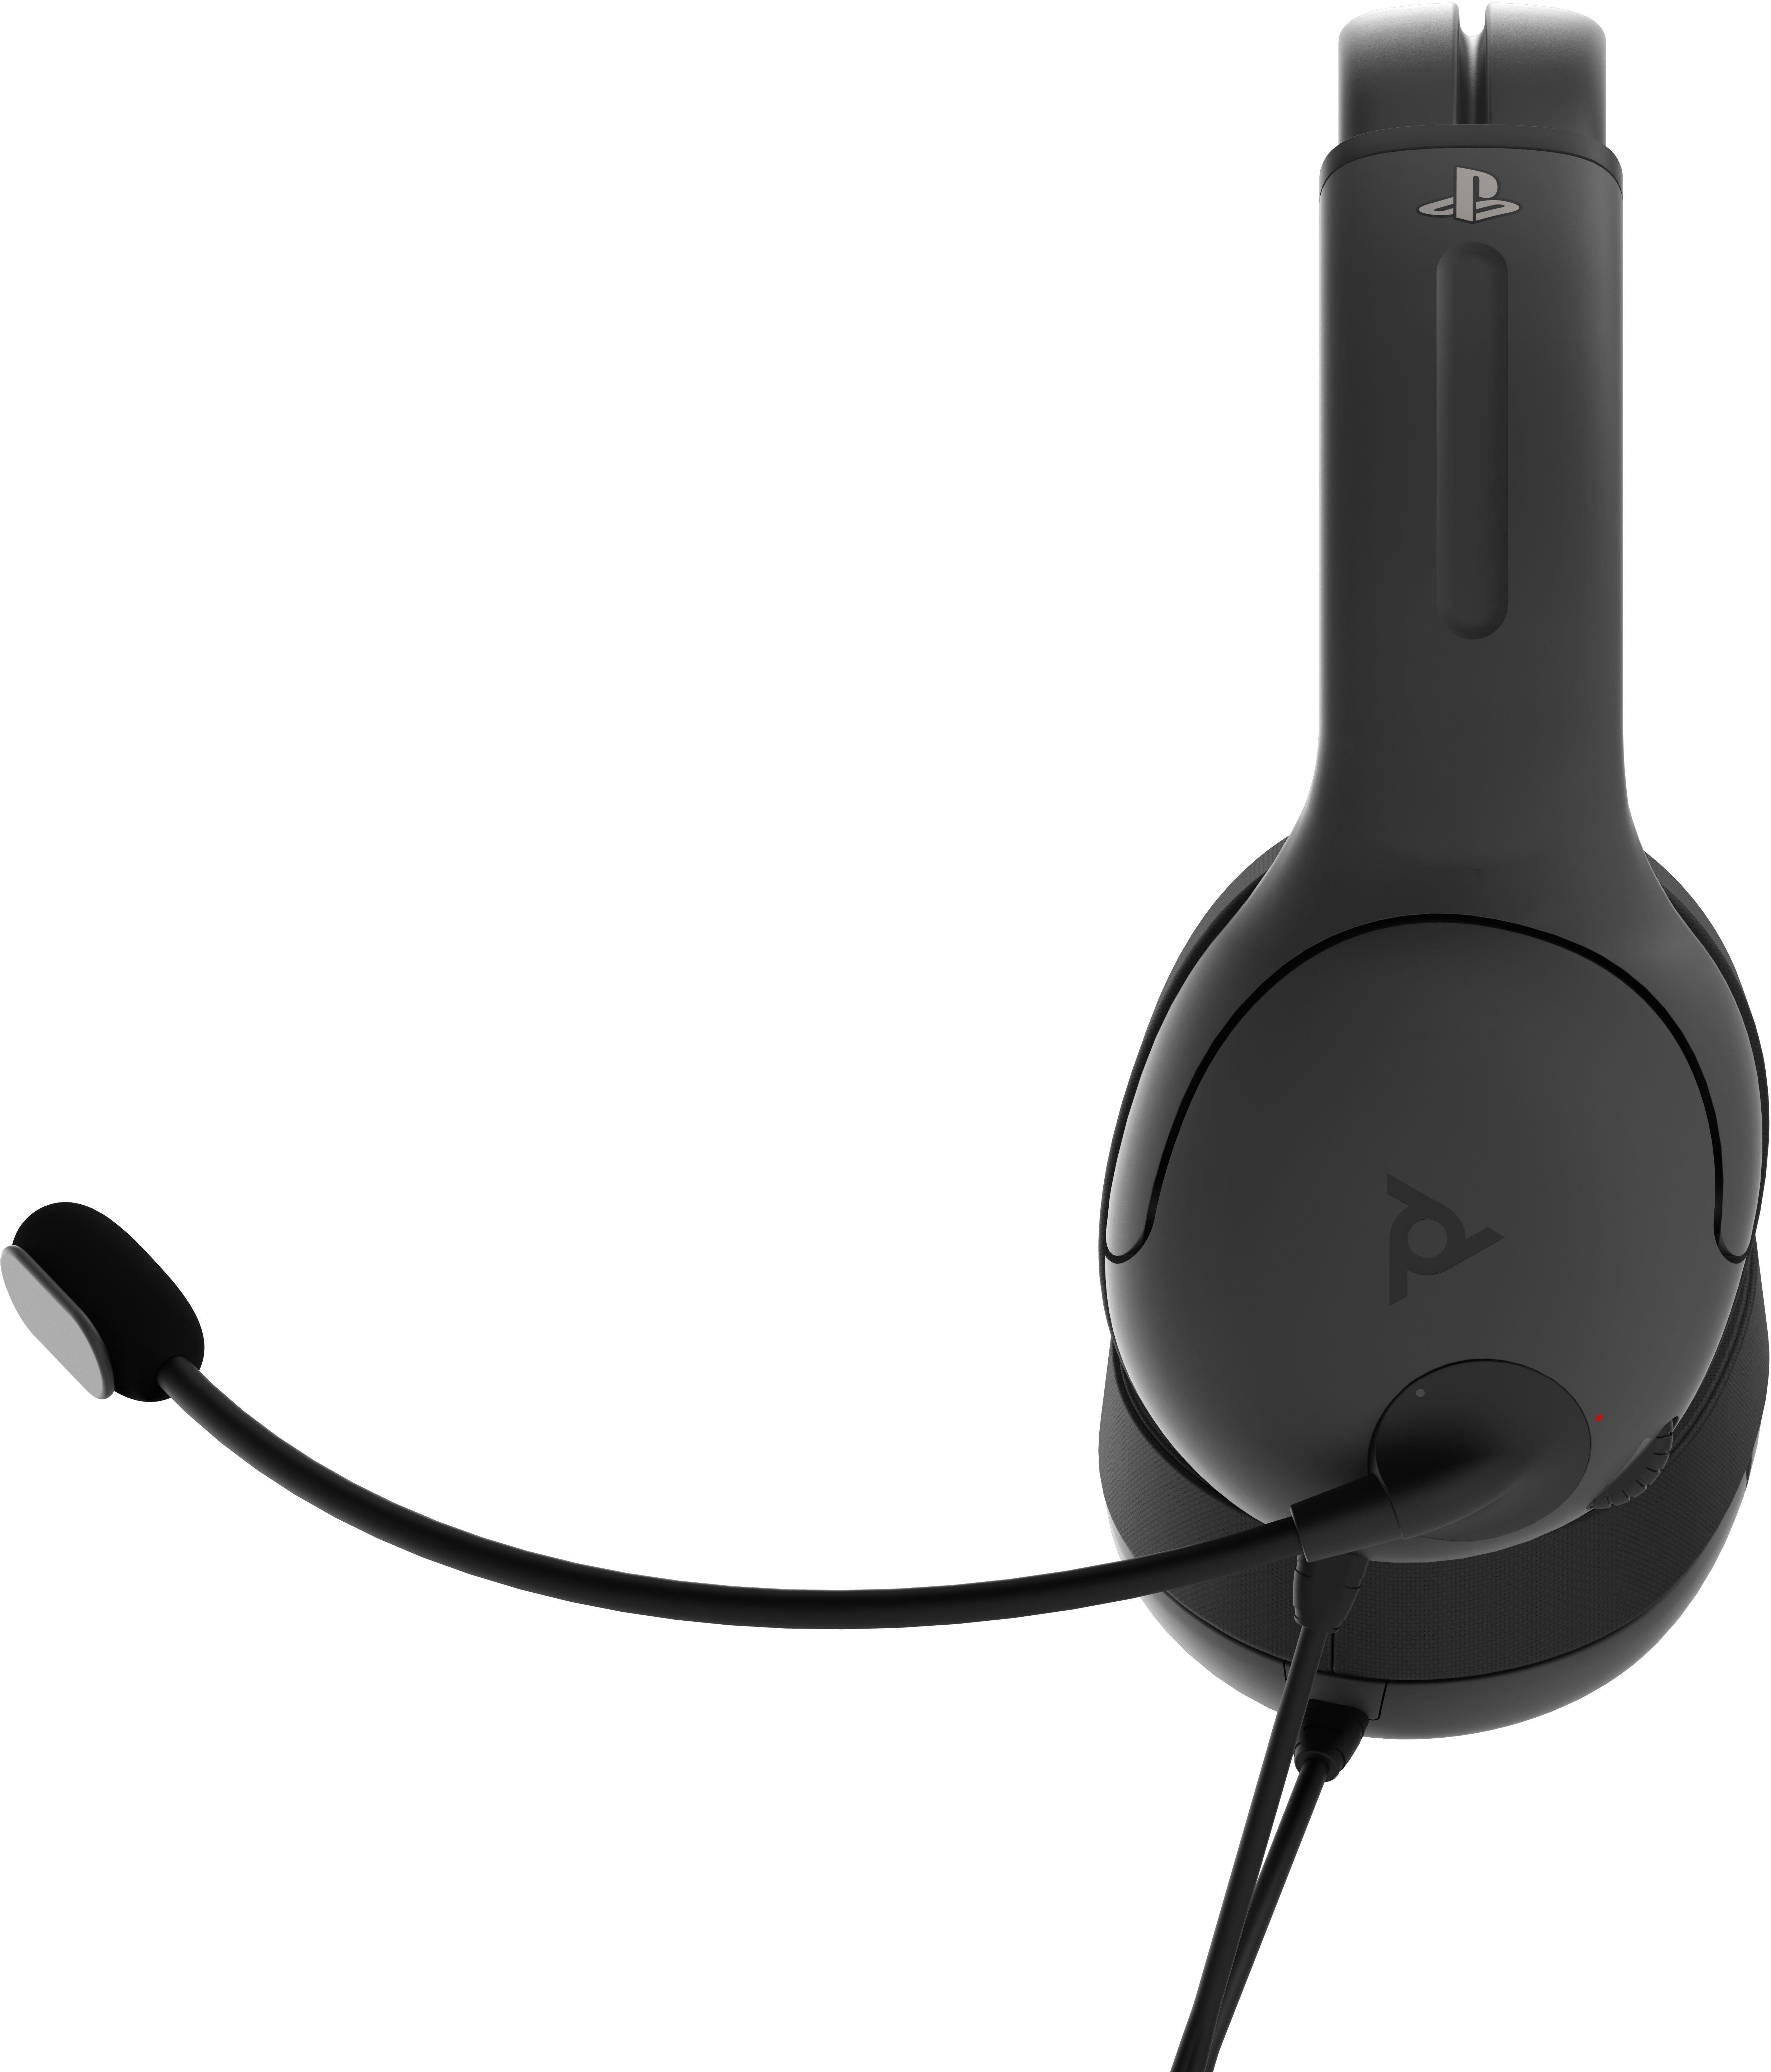 list item 4 of 6 PDP Gaming LVL40 Wired Stereo Gaming Headset for PlayStation 5 and PlayStation 4